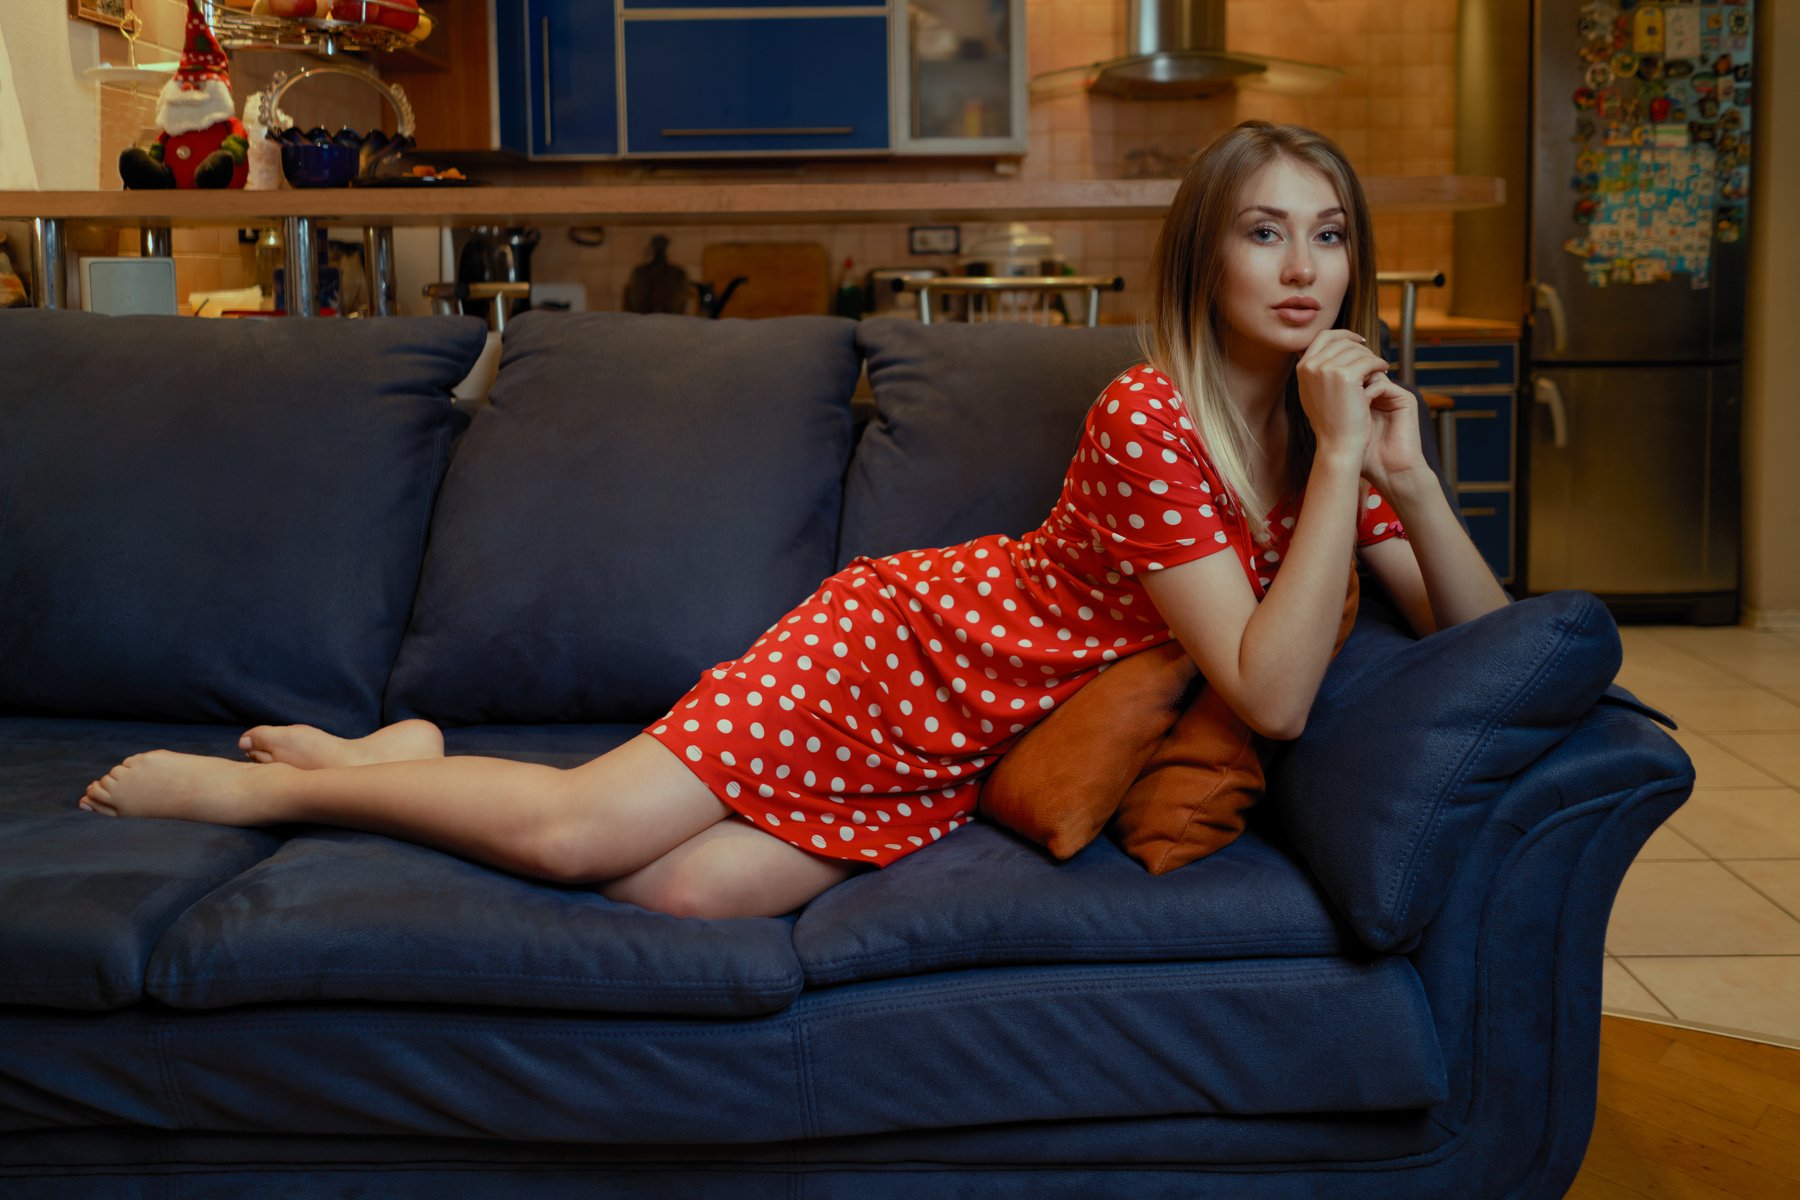 60s retro,american,attractive,background,beautiful,beauty,blue sofa,brunette,casual,caucasian,charming,coiffure,cute girl,dots,elegant,fashion,female,femininity,girl,glamorous,gorgeous,hairstyle,home,indoors,interior,lady,lifestyle,people,pin up,polka dot, Андрей Филоненко